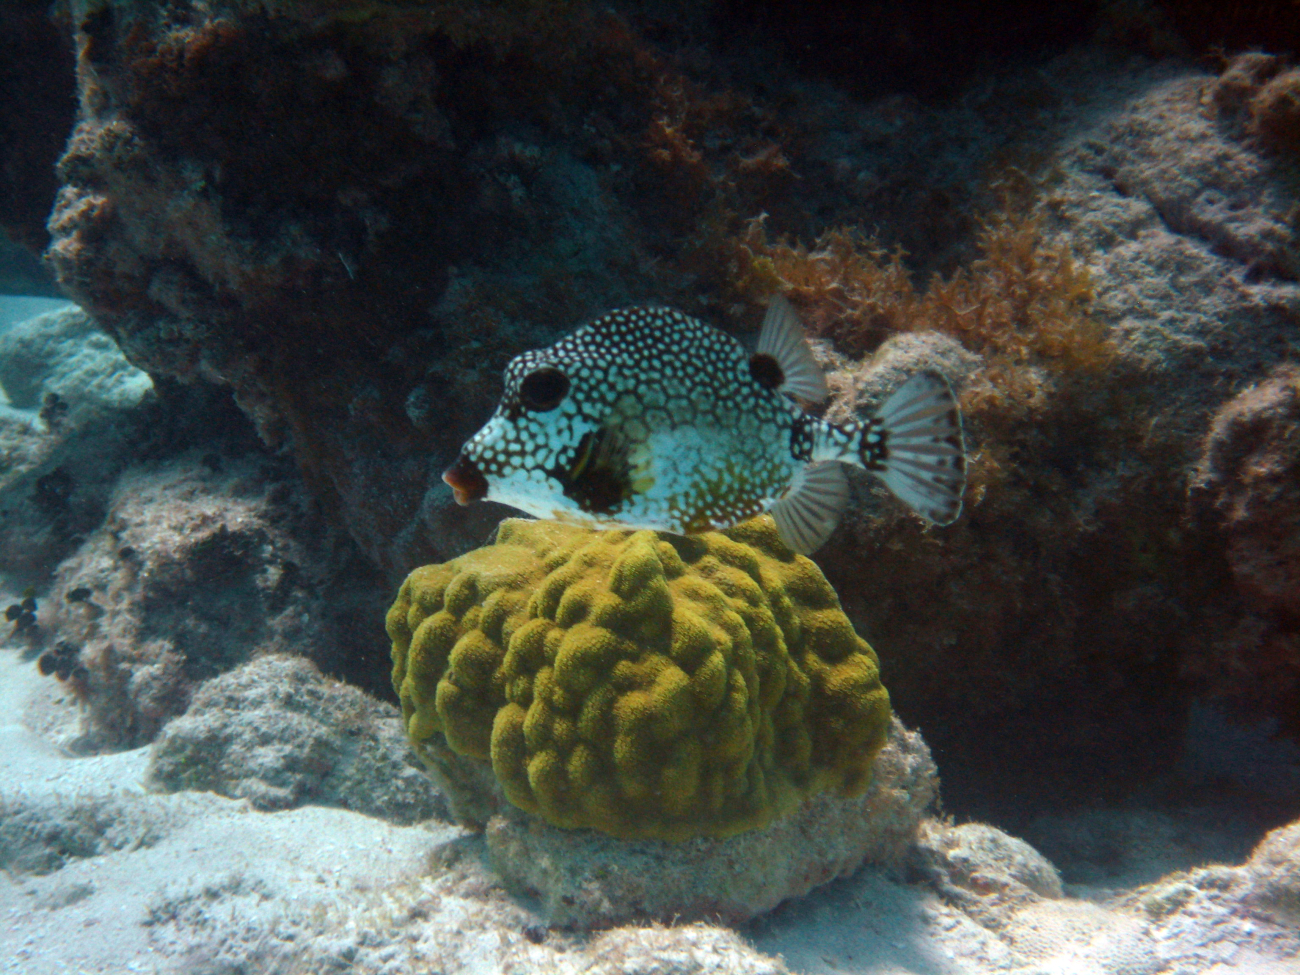 Smooth trunkfish (Lactophrys triqueter) and mustard hill coral (Poritesastreoides)